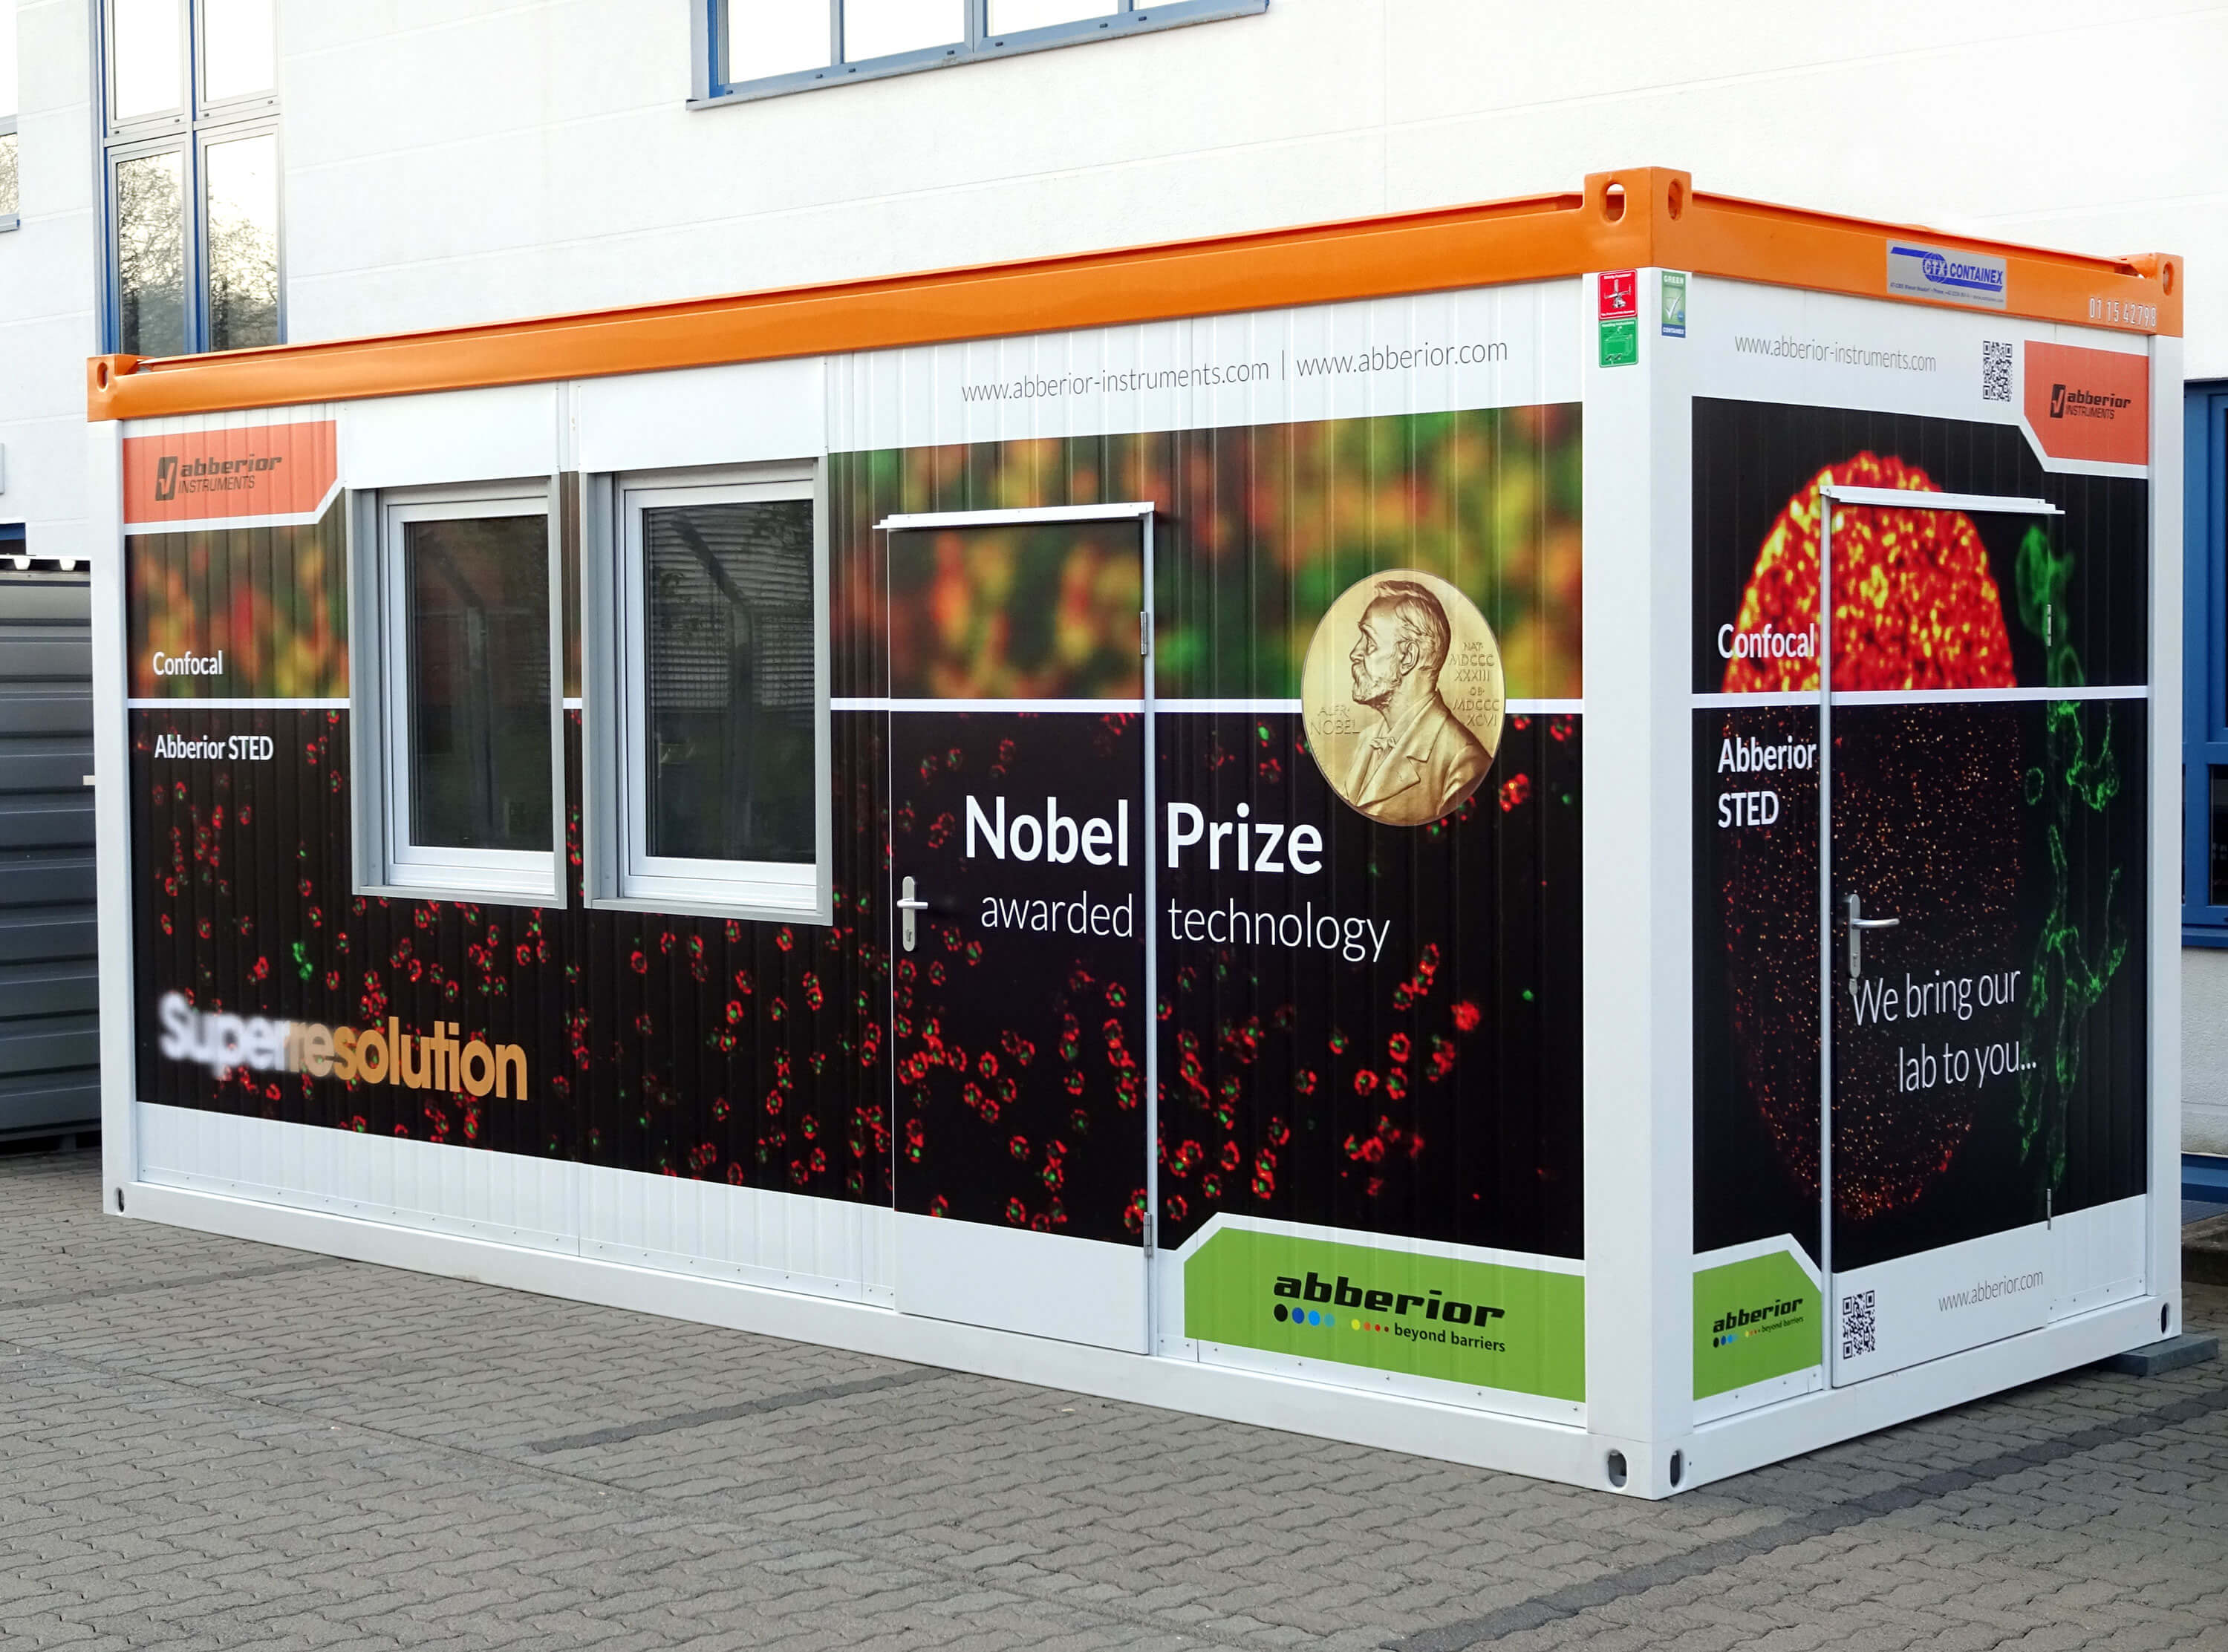 abberior's STED-themed roadshow container in Hamburg